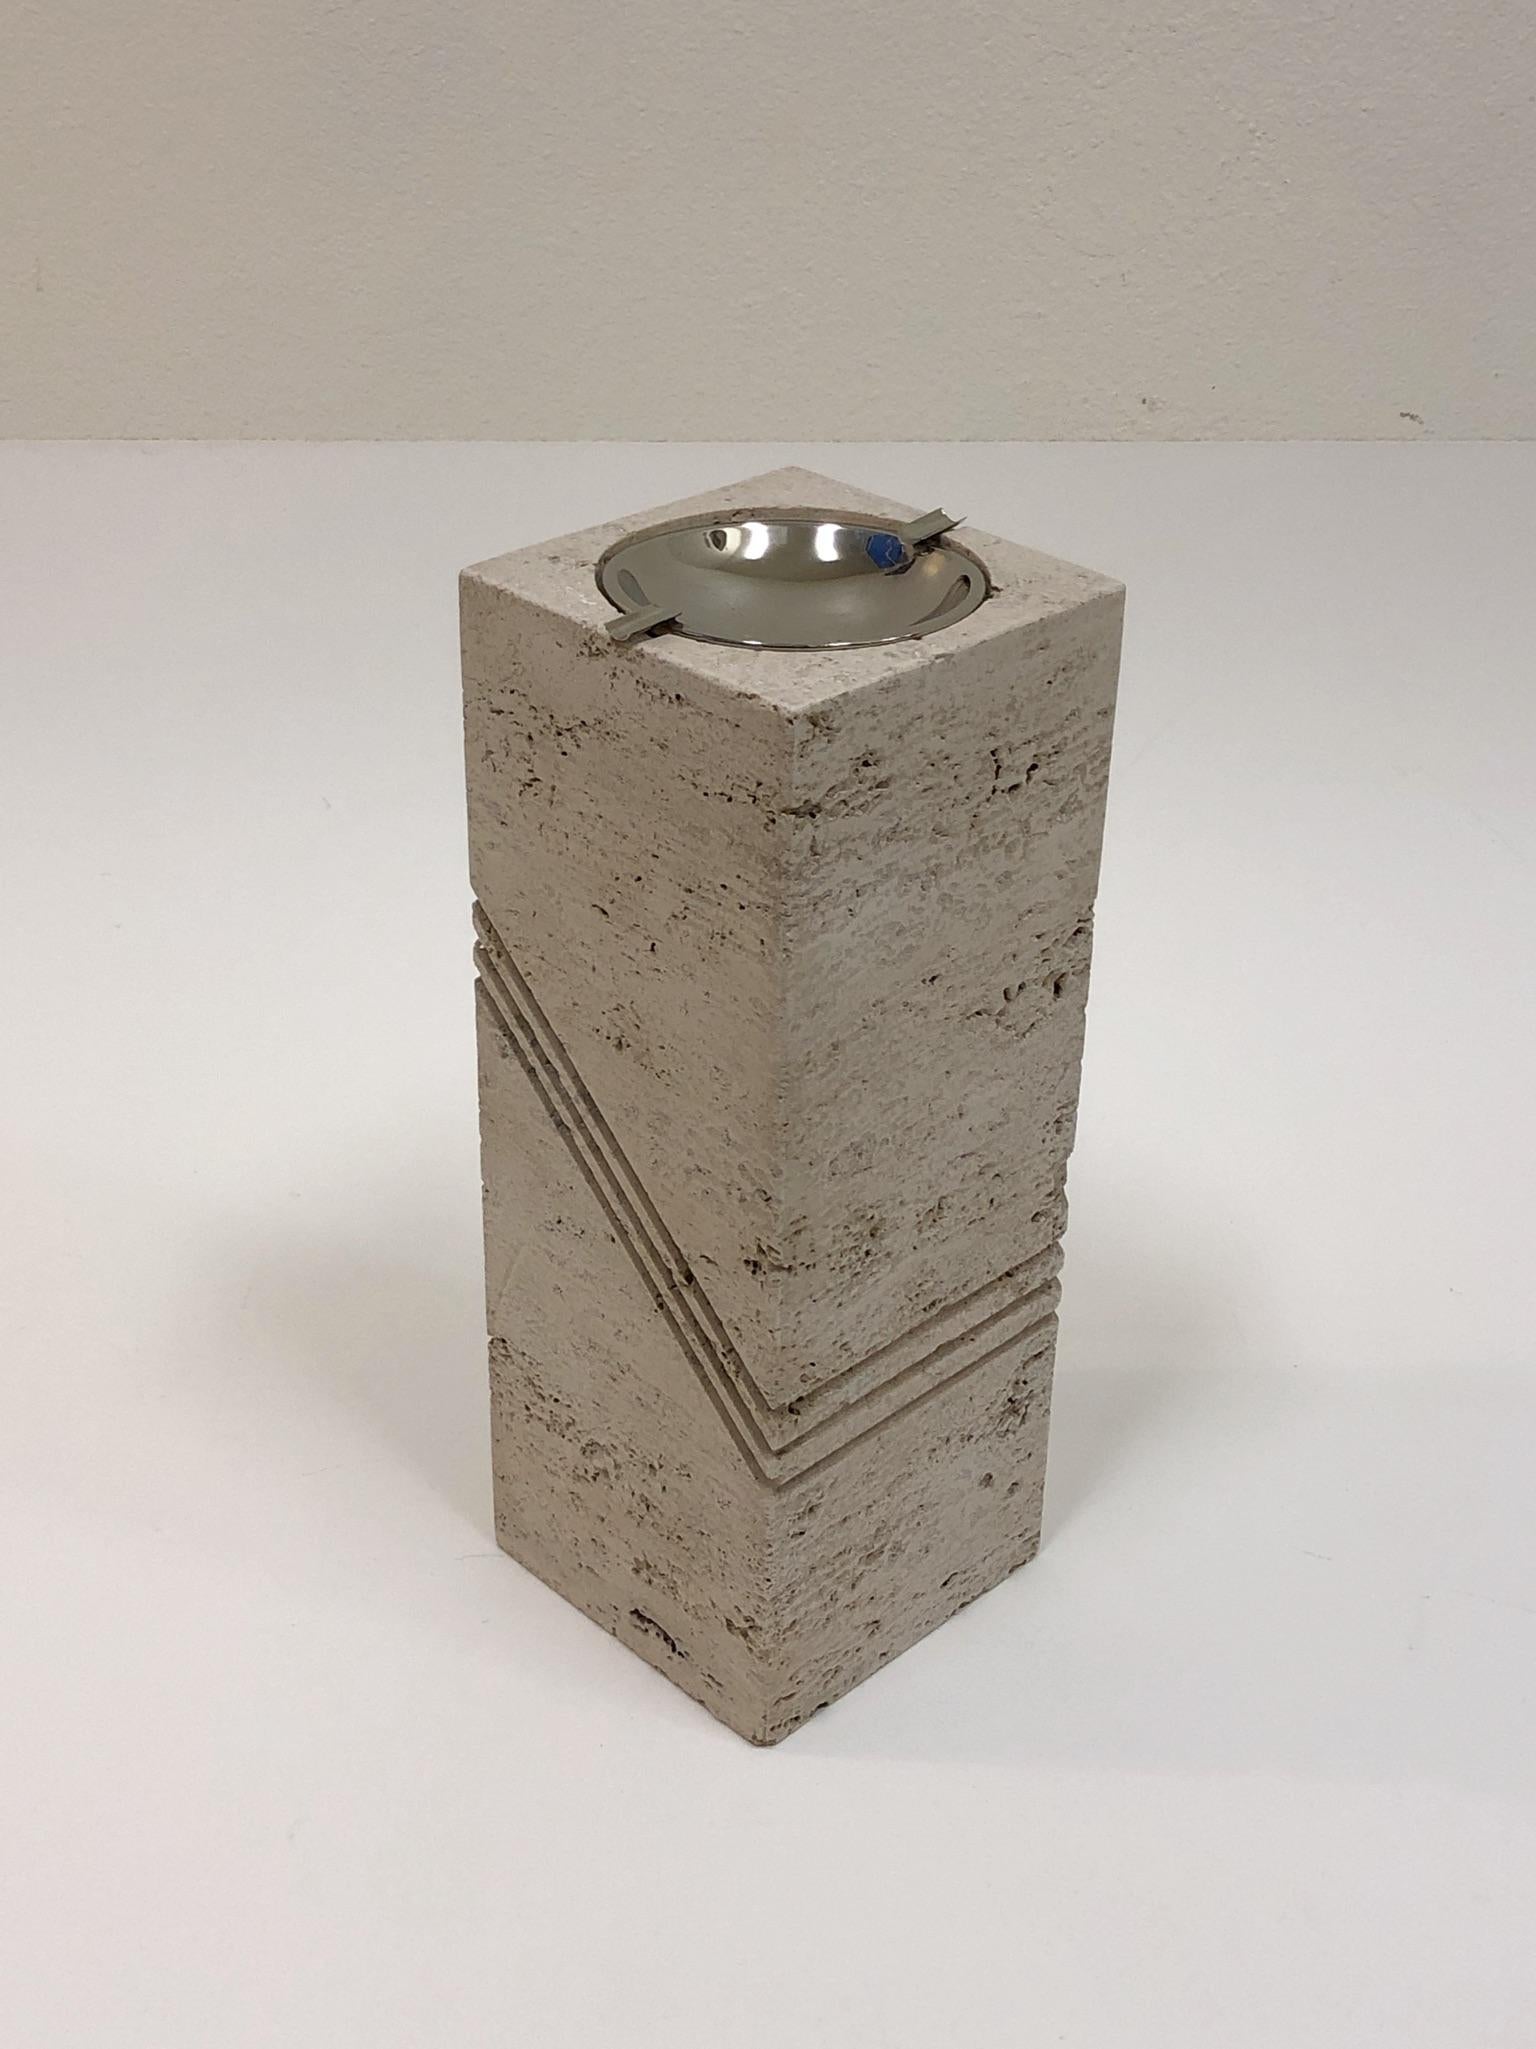 A glamorous solid Italian travertine and polish nickel freestanding ashtray by Marble Art Italy

Dim: 15.75” high 6” deep 6” wid